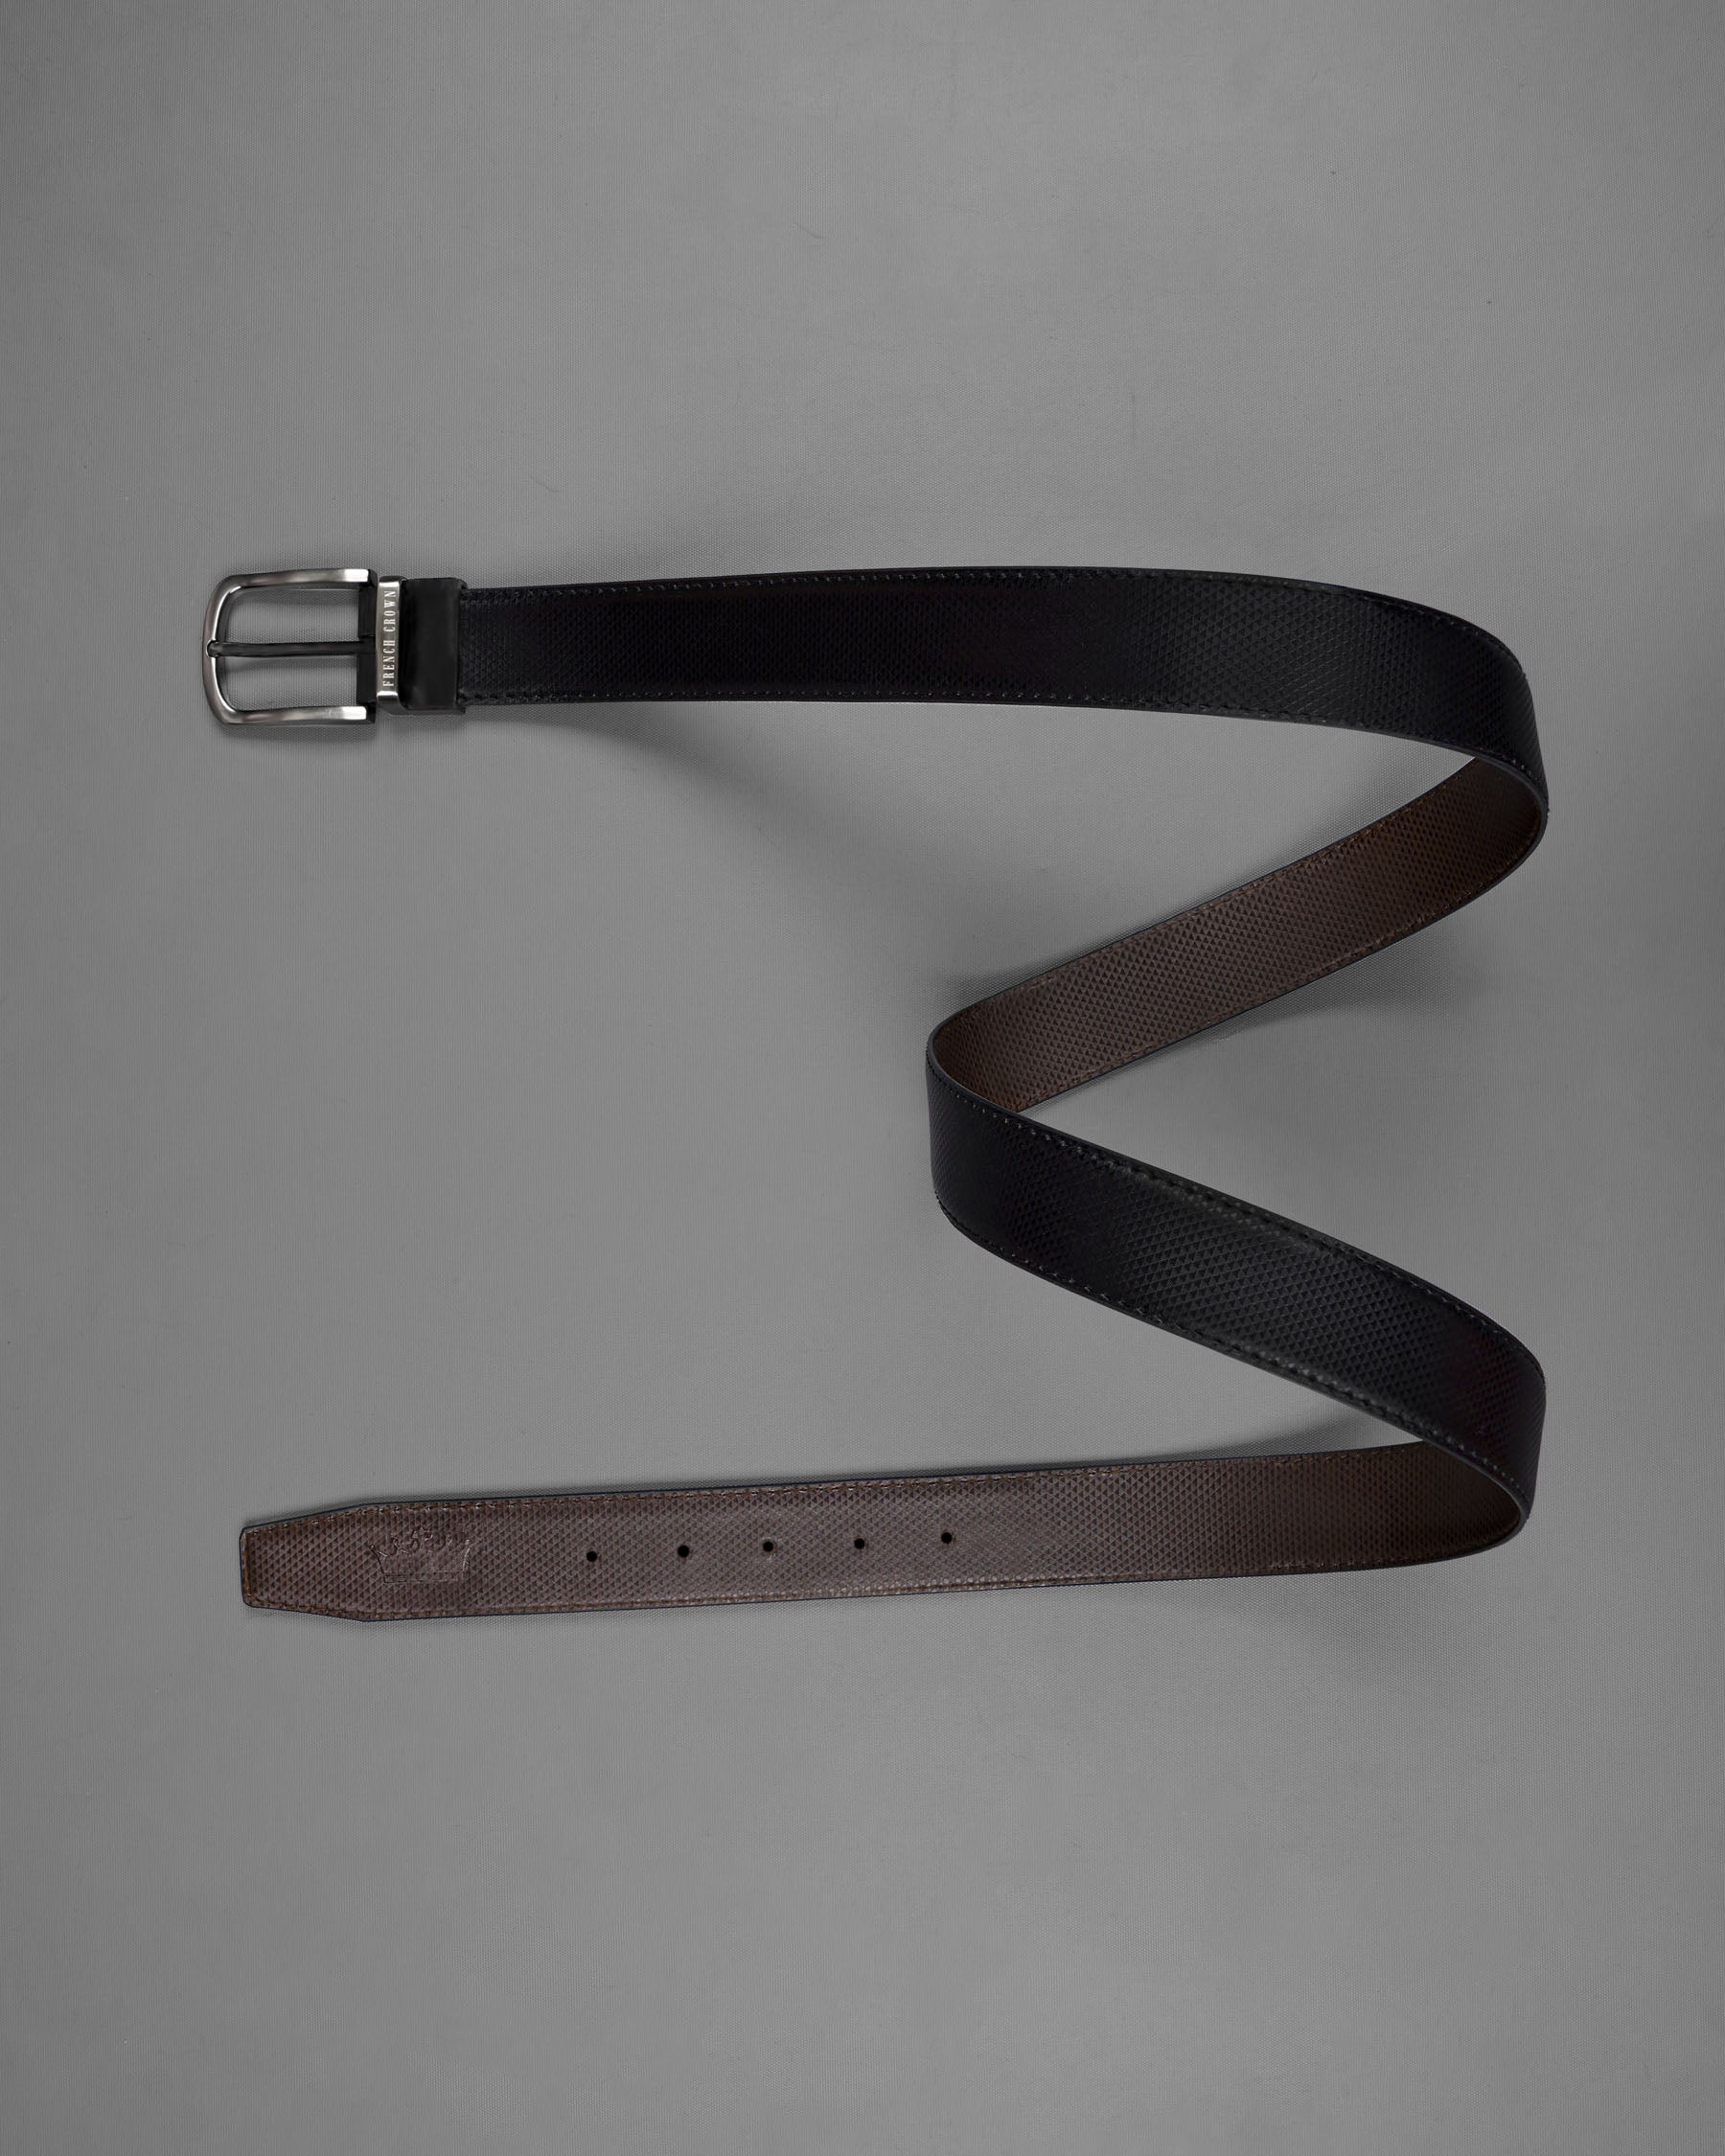 Silver Metallic Shiny Buckle Jade Black and Brown Leather Free Handcrafted Reversible Belt